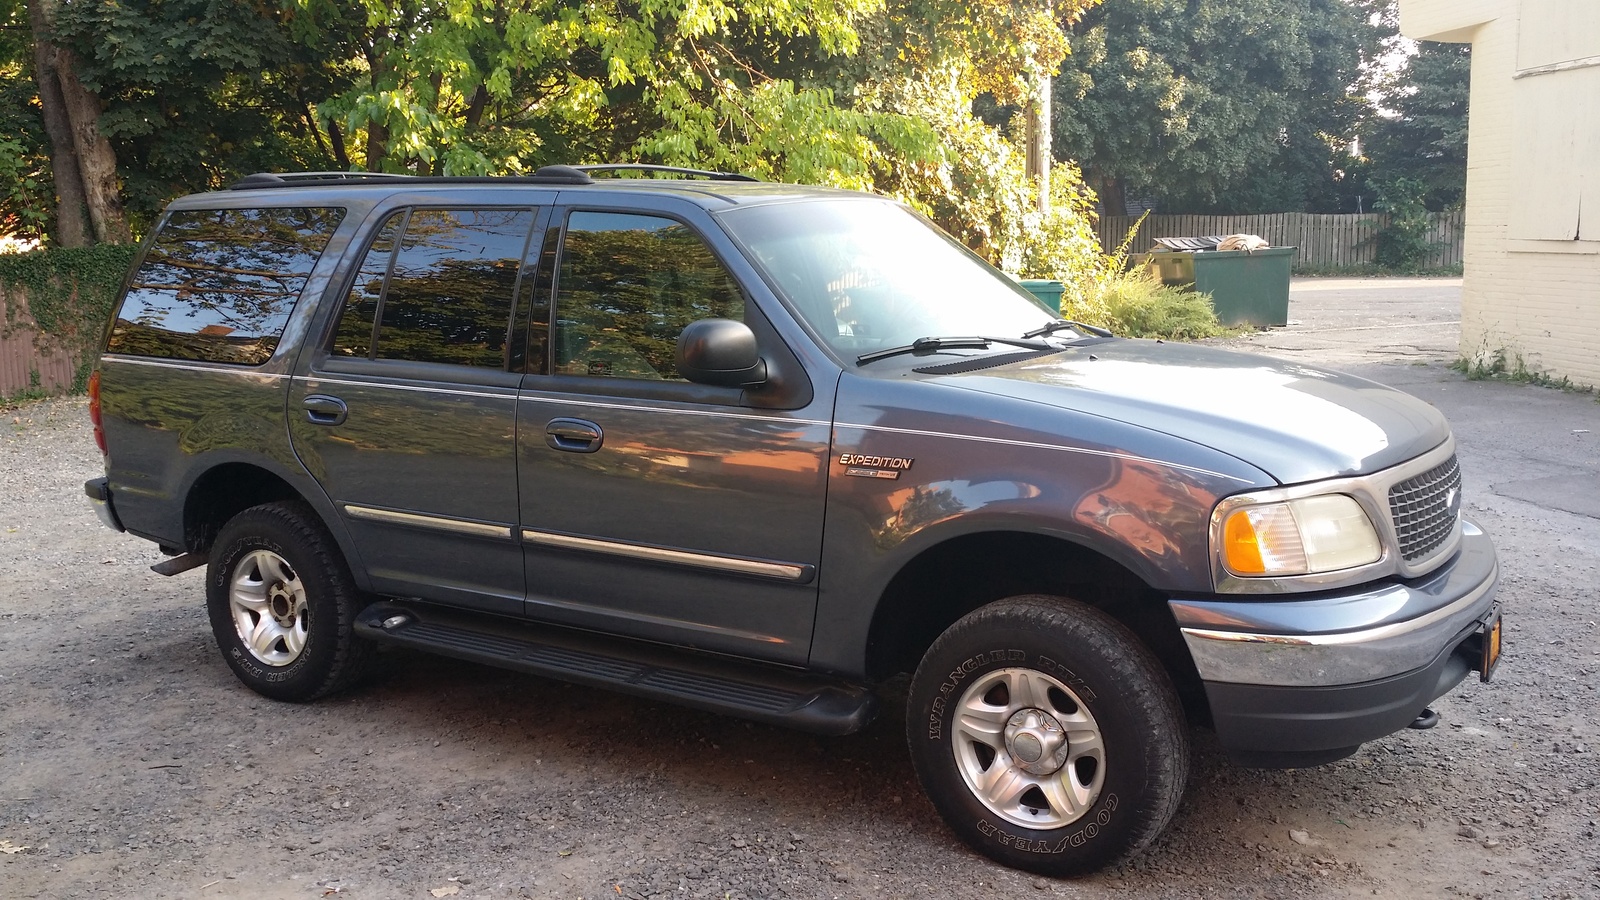 2000 Ford expedition fuel efficiency #2